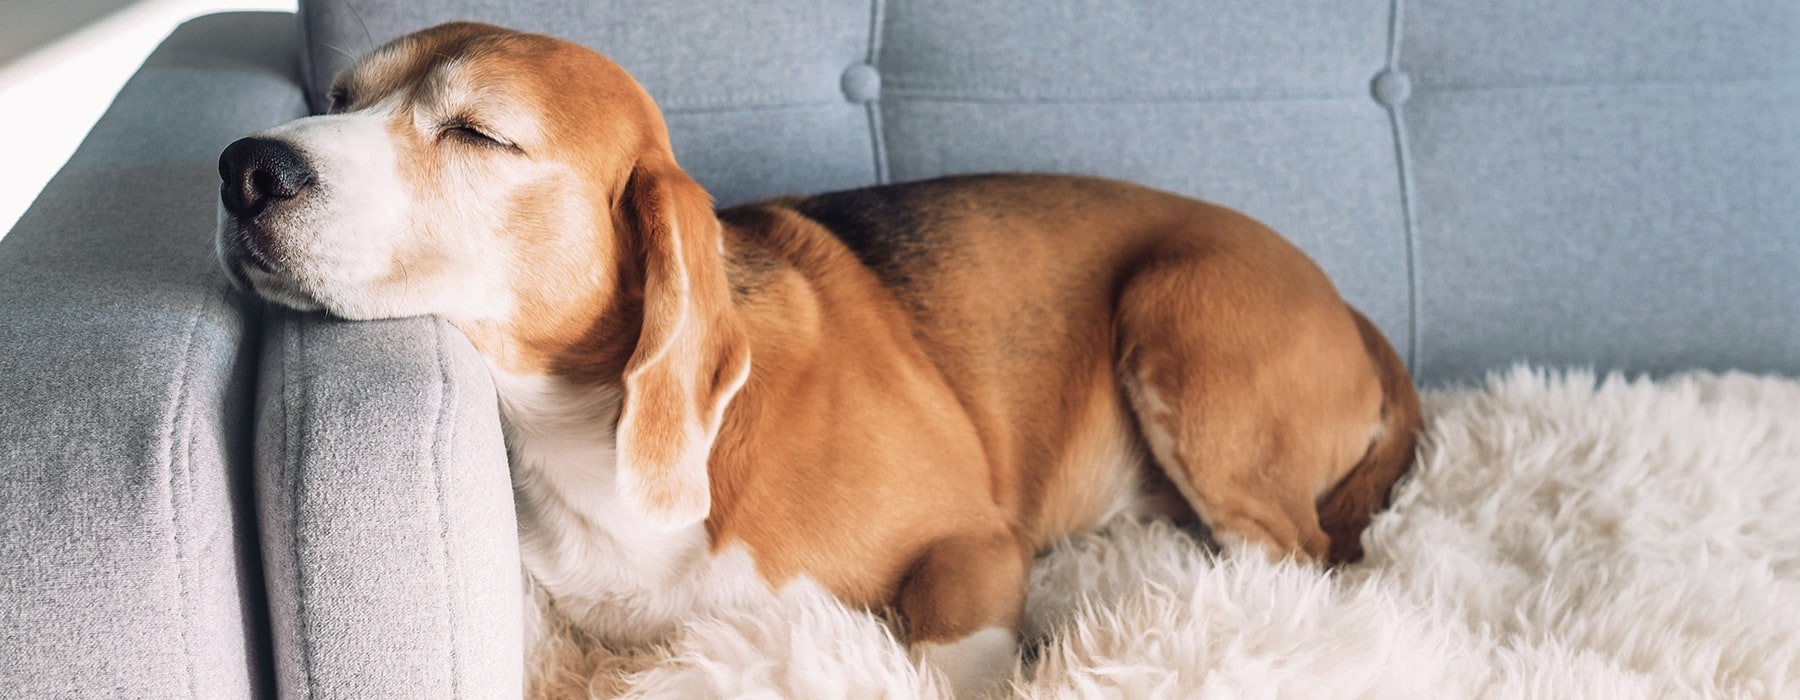 lifestyle image of a dog laying on a couch